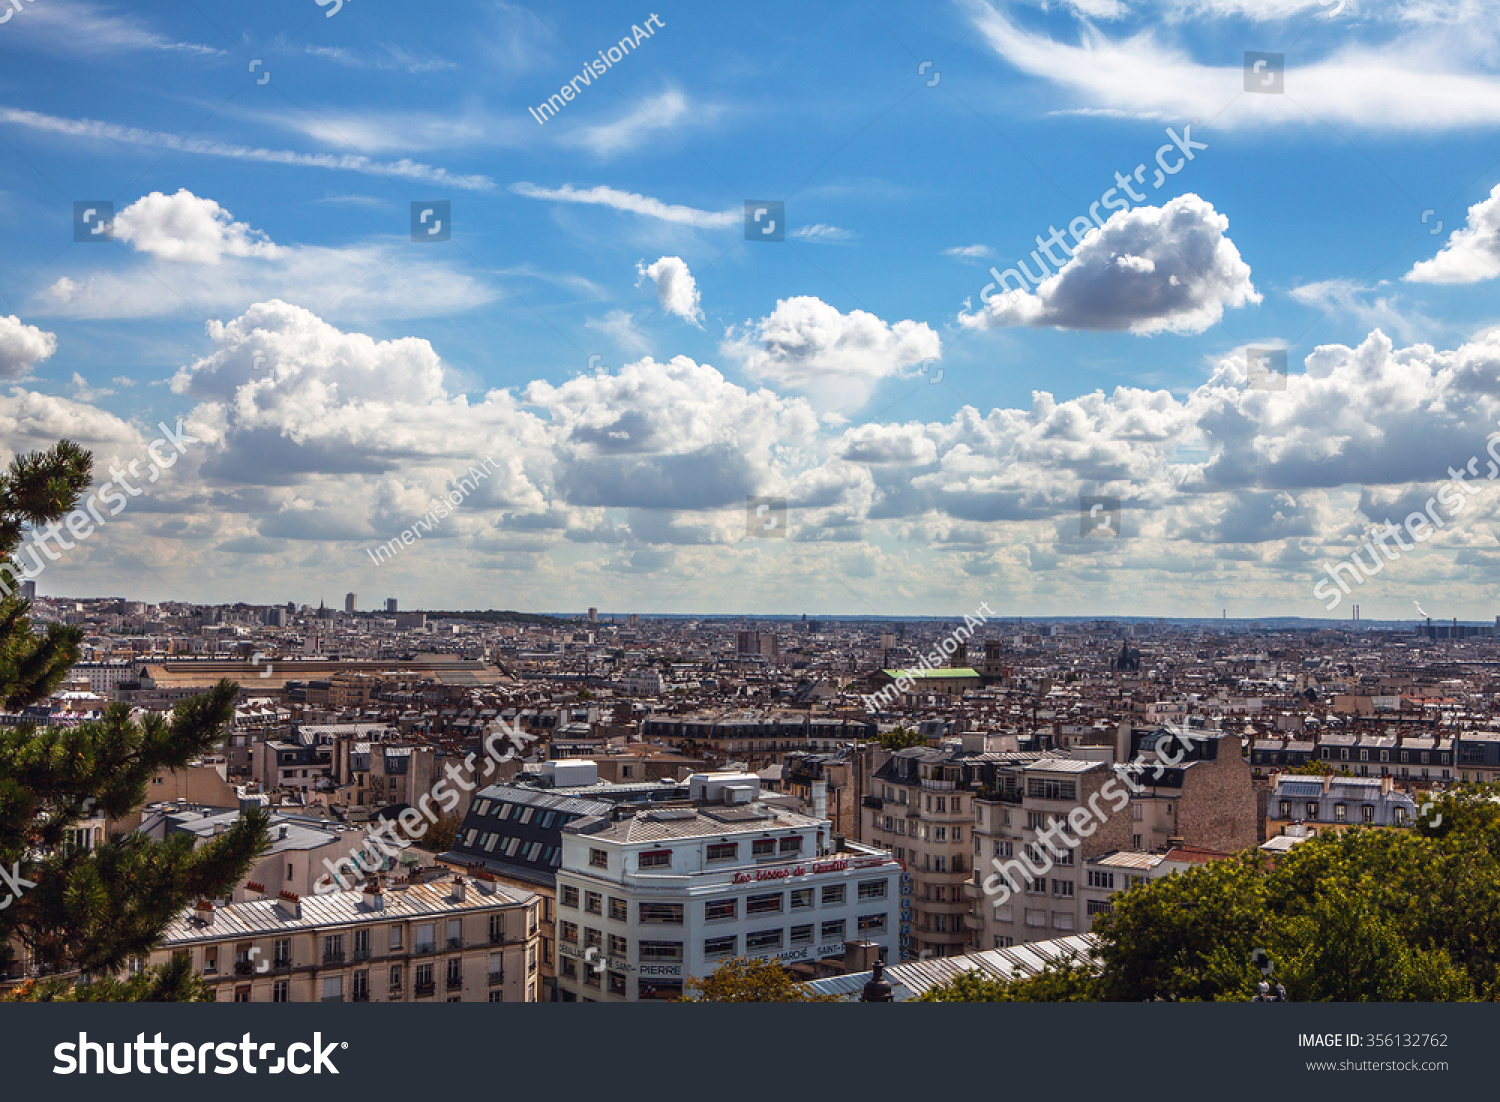 PARIS, FRANCE - AUGUST 30, 2015: View from Montmartre to summer Paris and beautiful blue sky with soft clouds. Paris, France. #356132762